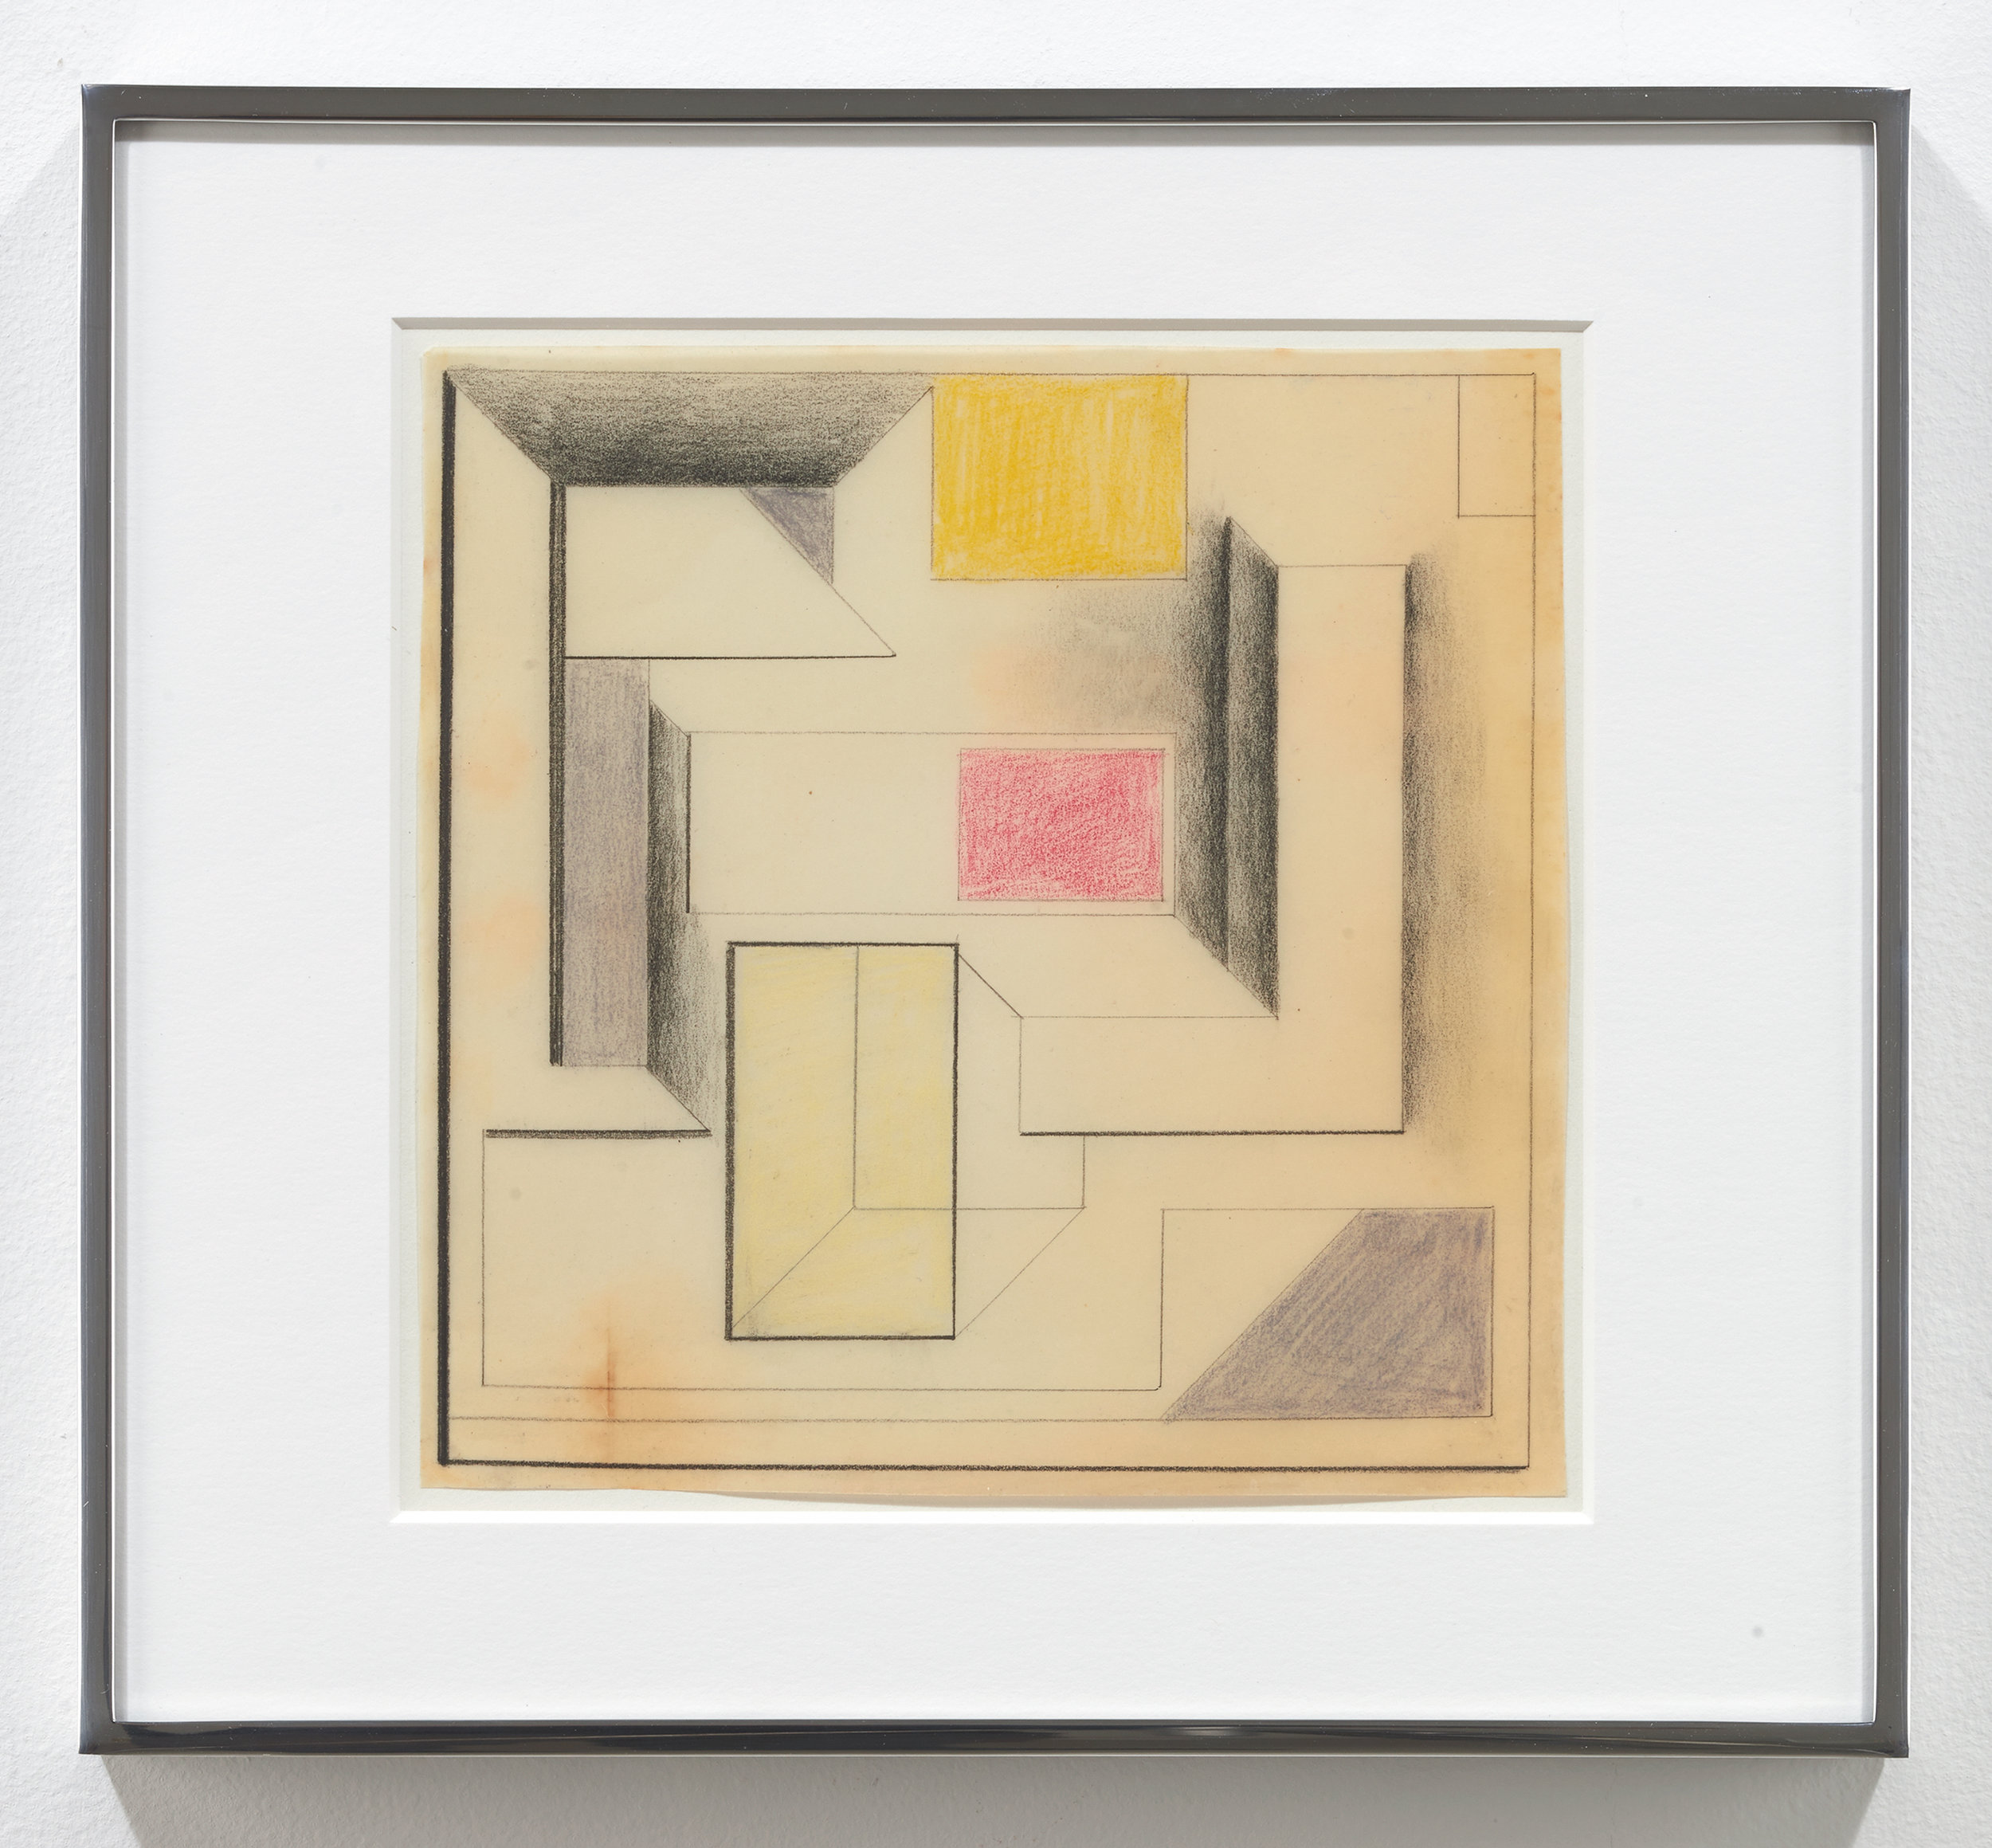  Suzanne Blank Redstone,  Drawing for Construction #7 , 1968, Paper, tracing paper, pencil and color pencil, Framed dimensions: 10.25 x 11.25 inches 